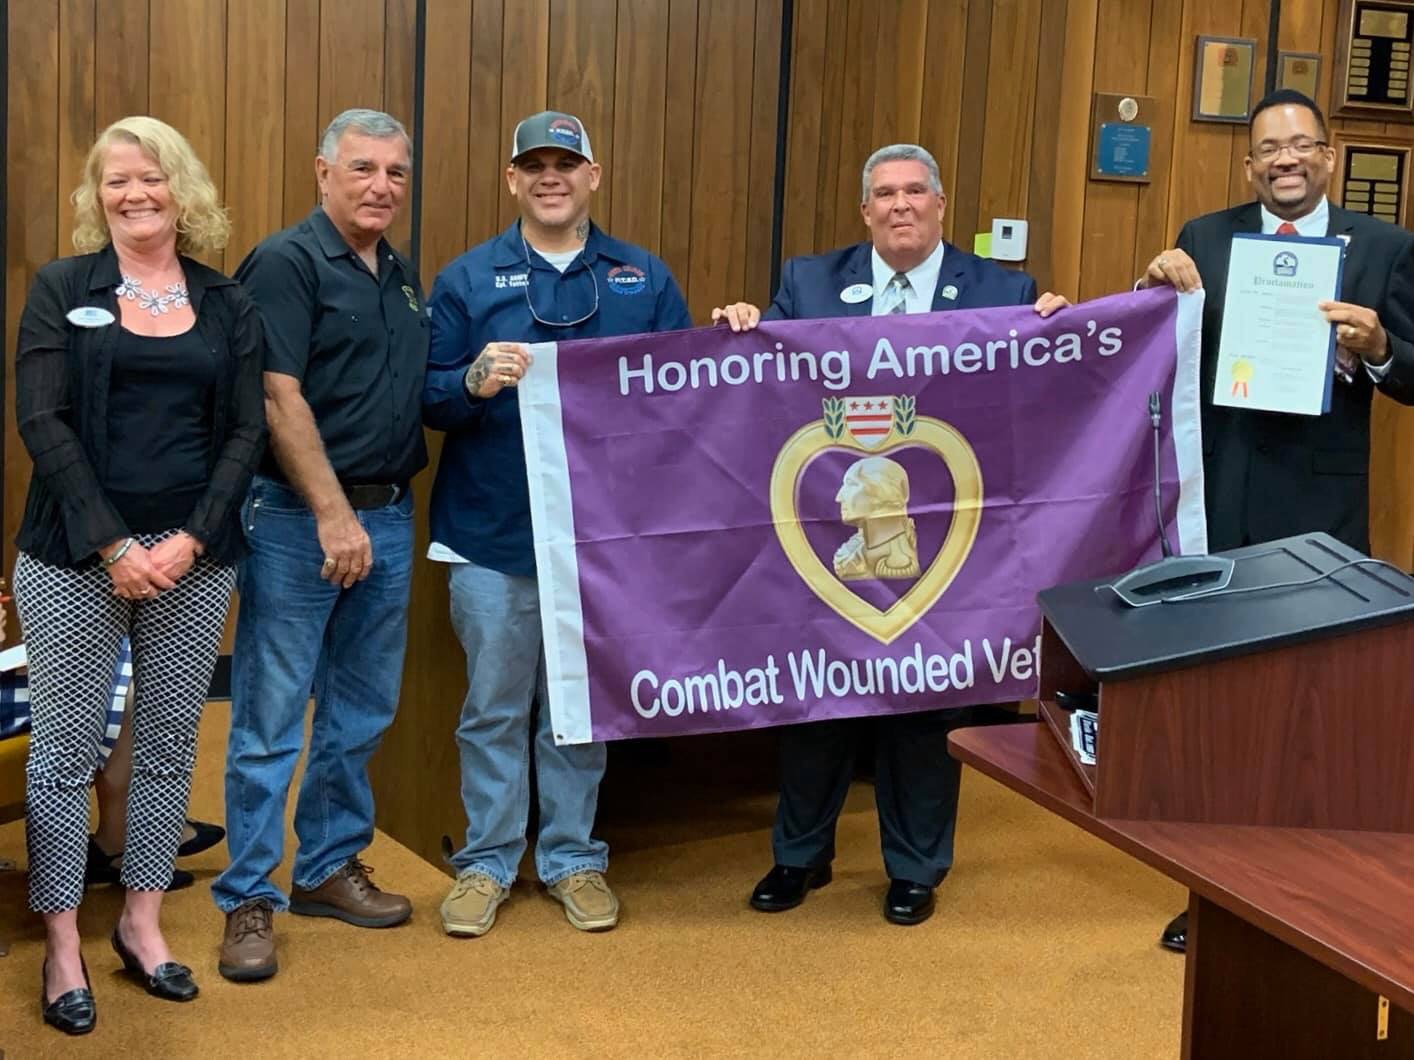 The group stands holding the Purple Heart flag, and the mayor holds a proclamation